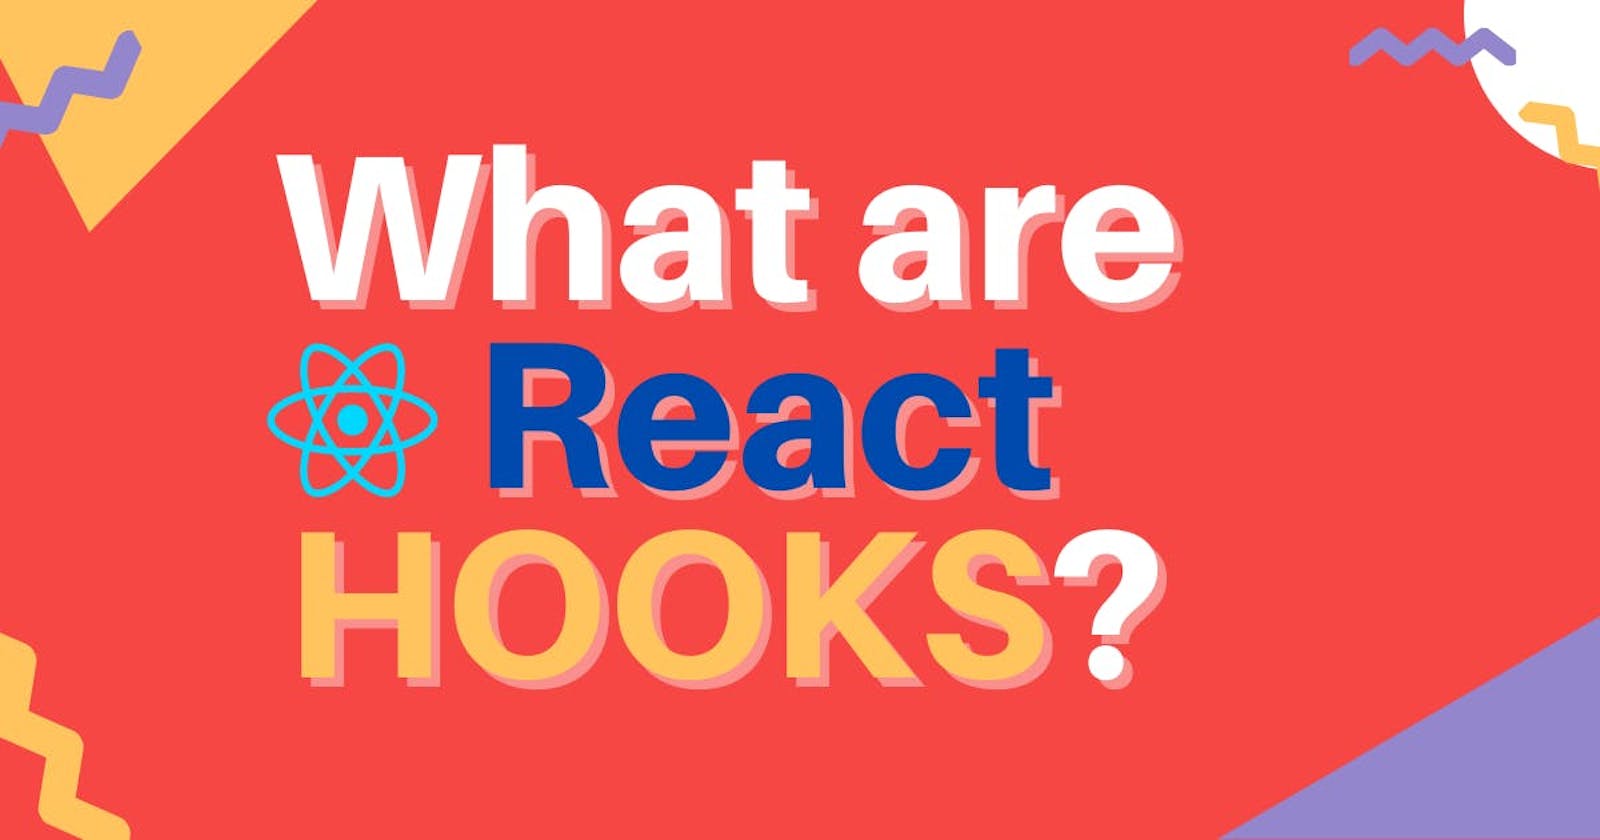 What are HOOKS in React?